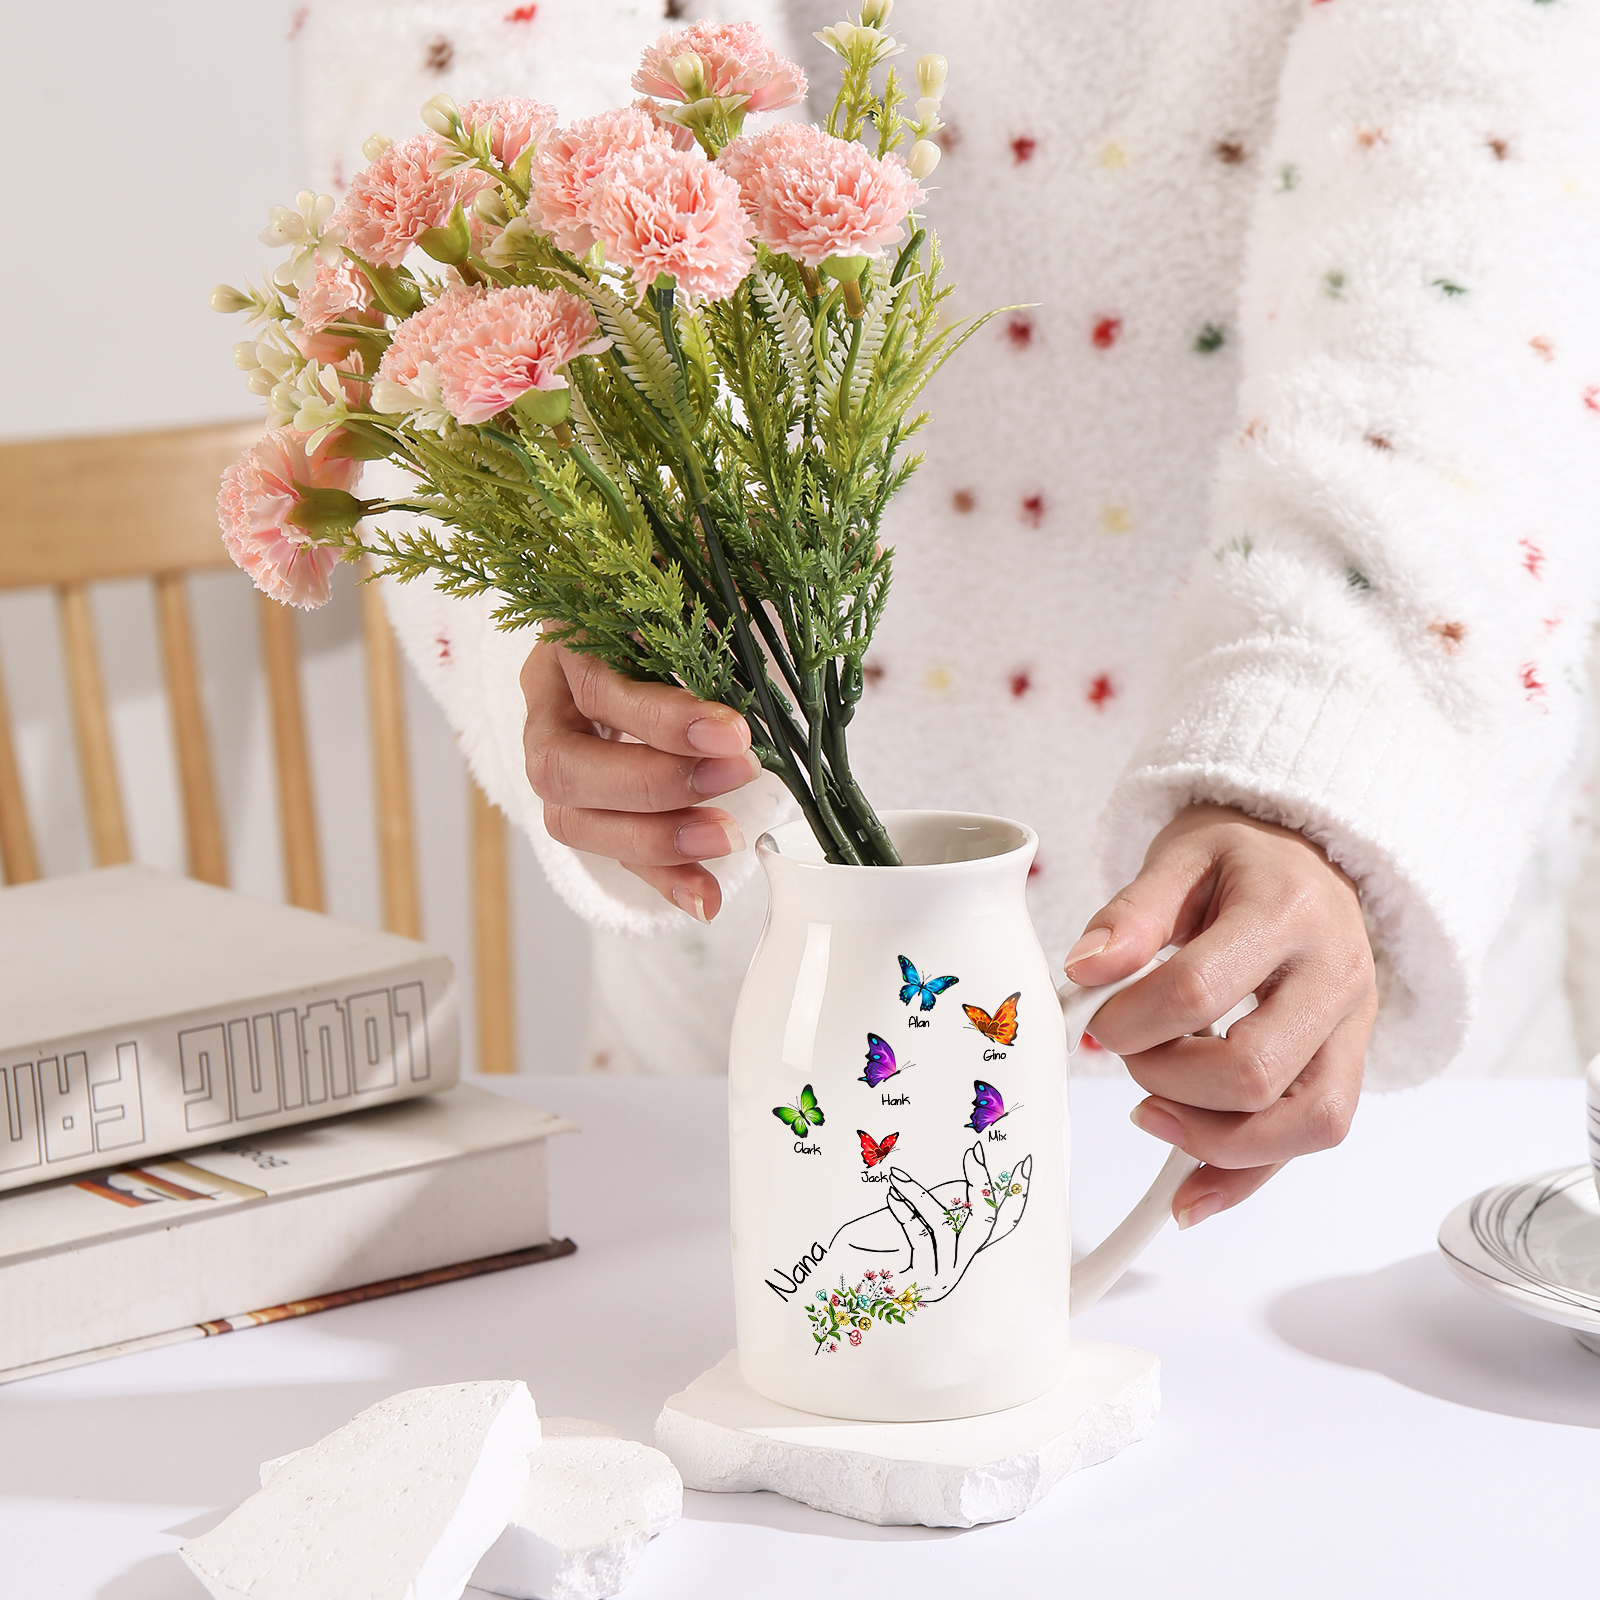 6 Names - Personalized Exquisite Flower Hand Butterfly Style Ceramic Cup With Customizable Names As a Special Gift For Nana/Mom